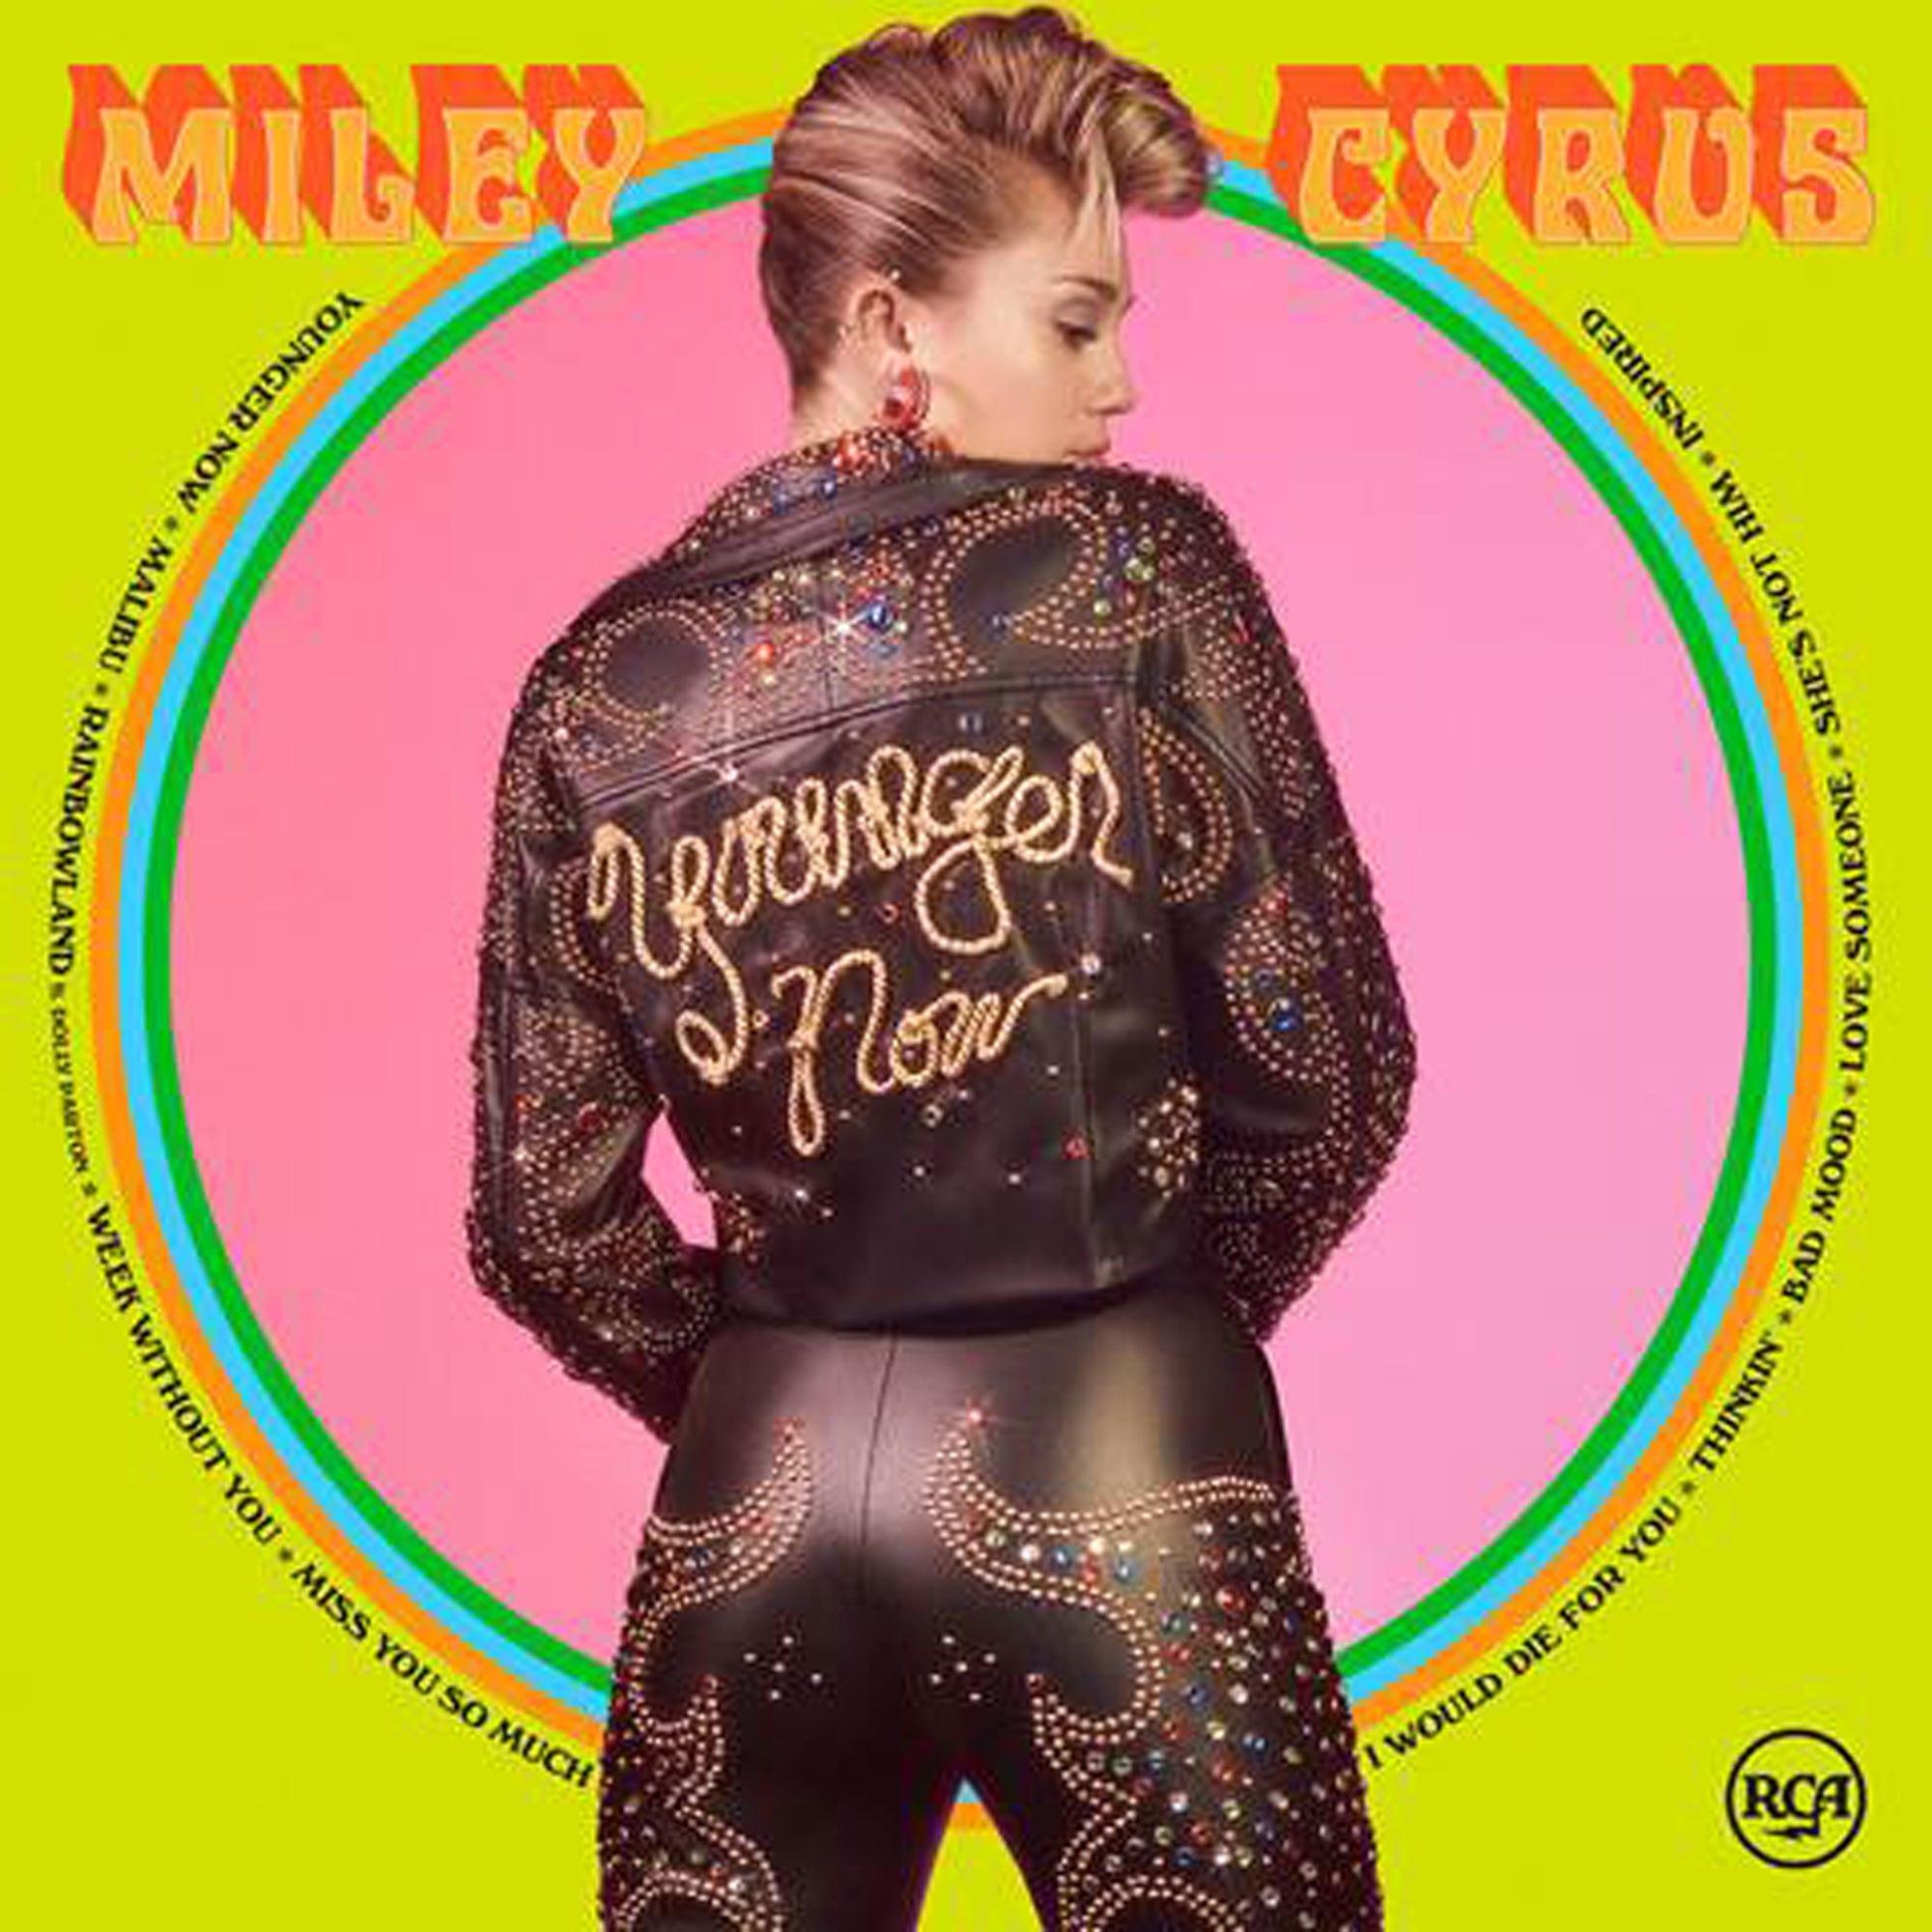 Miley Cyrus’s new album ‘Younger Now’